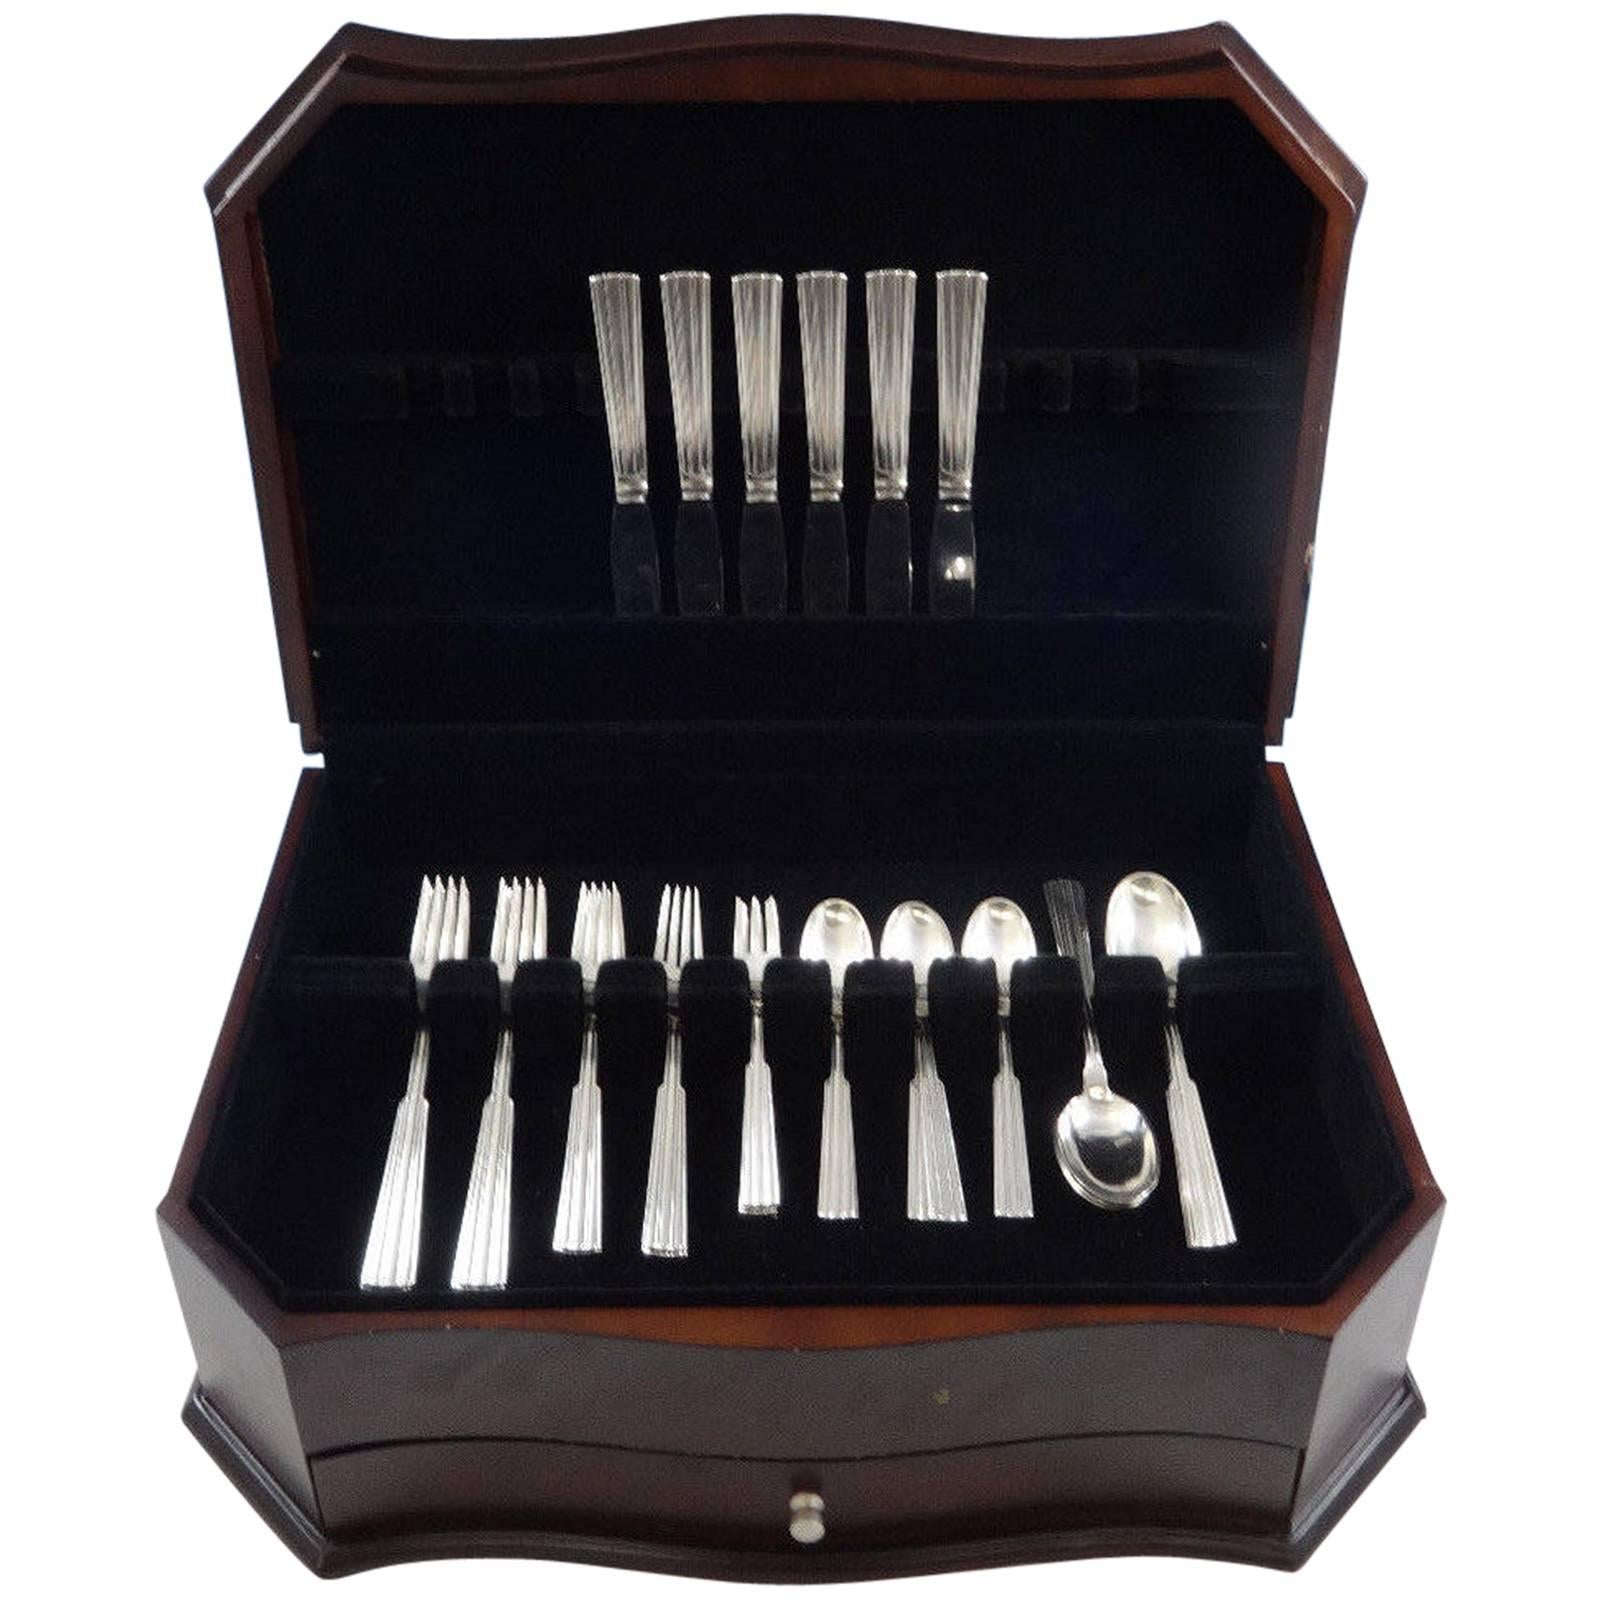 Else Marie by Orla Vagn Mogensen Danish sterling silver flatware set of 36 pieces.
 
Renowned silversmith Orla Vagn Mogensen was a silversmith in Denmark (Copenhagen) from 1949-1975. Orla Vagn Mogensen was also a top designer for Georg Jensen and